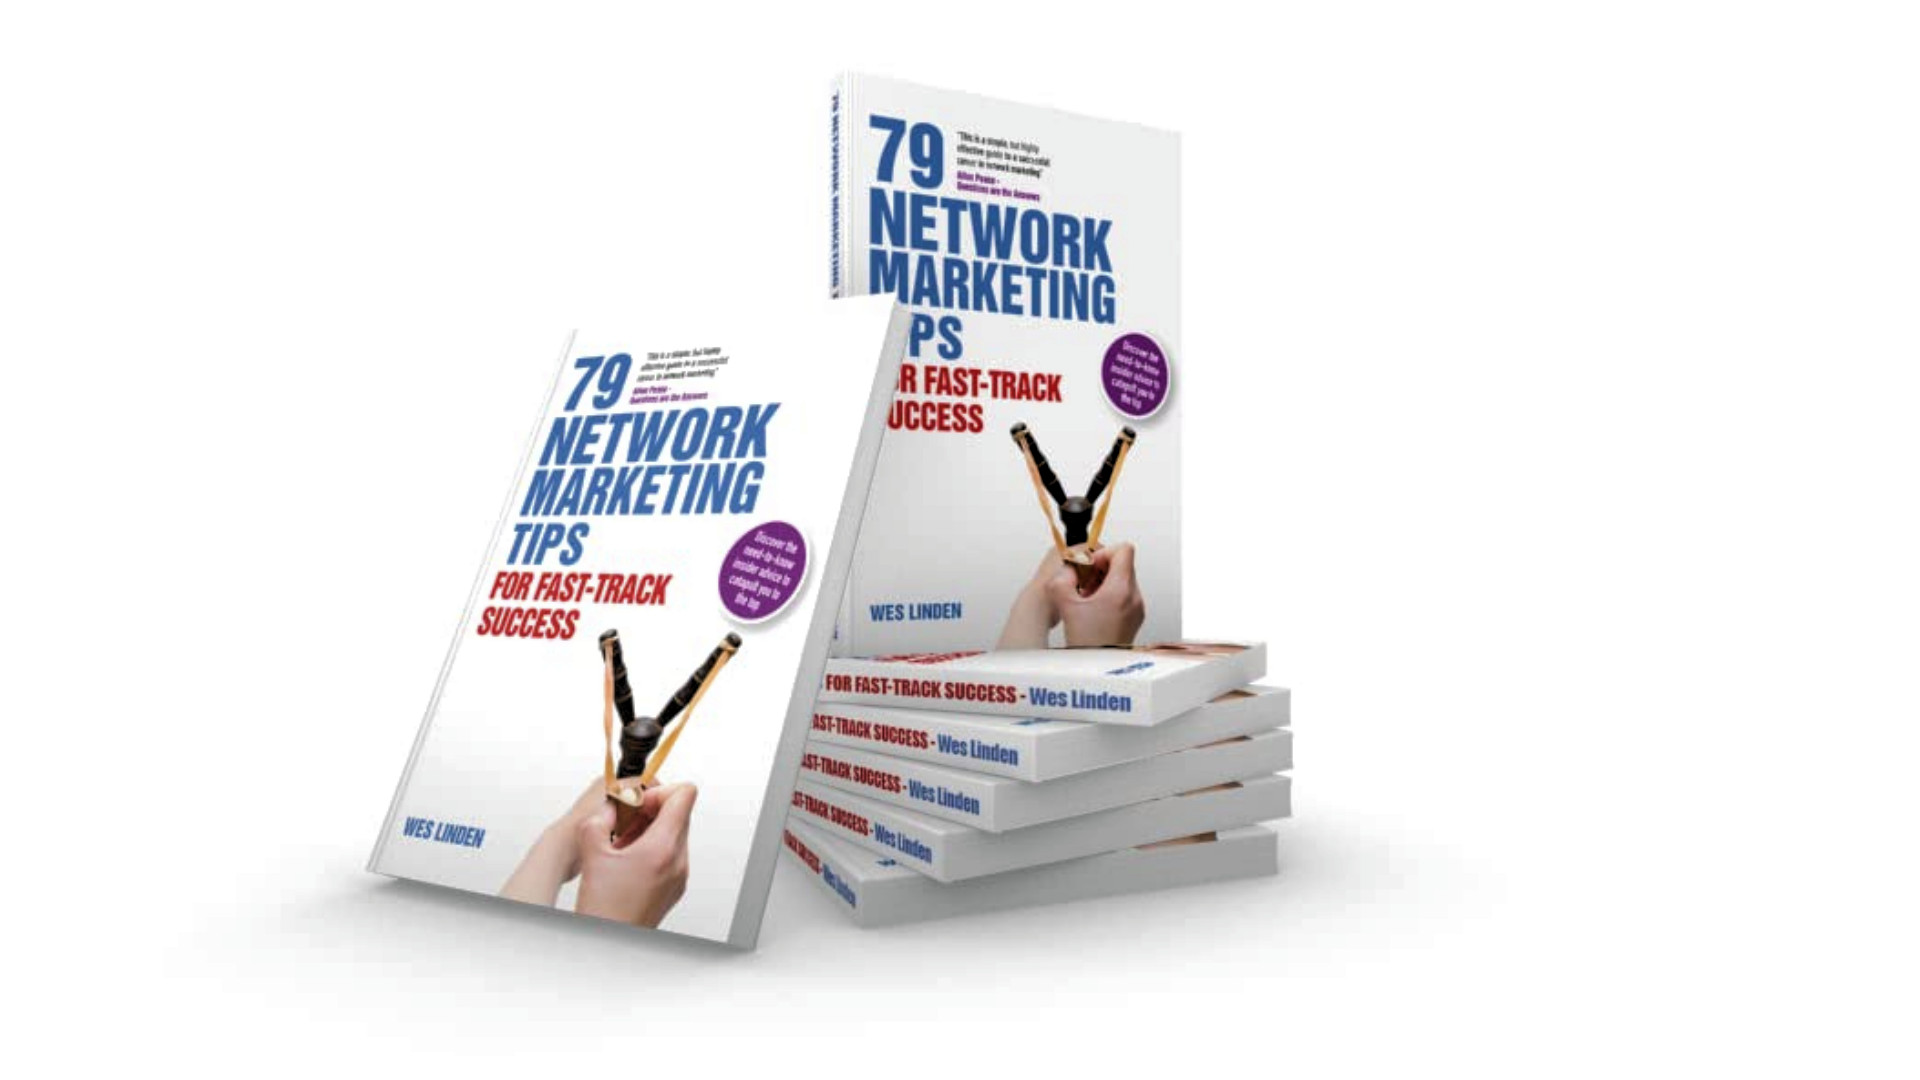 For fast-track success in Network Marketing - read 79 Network Marketing Tips by Wes Linden